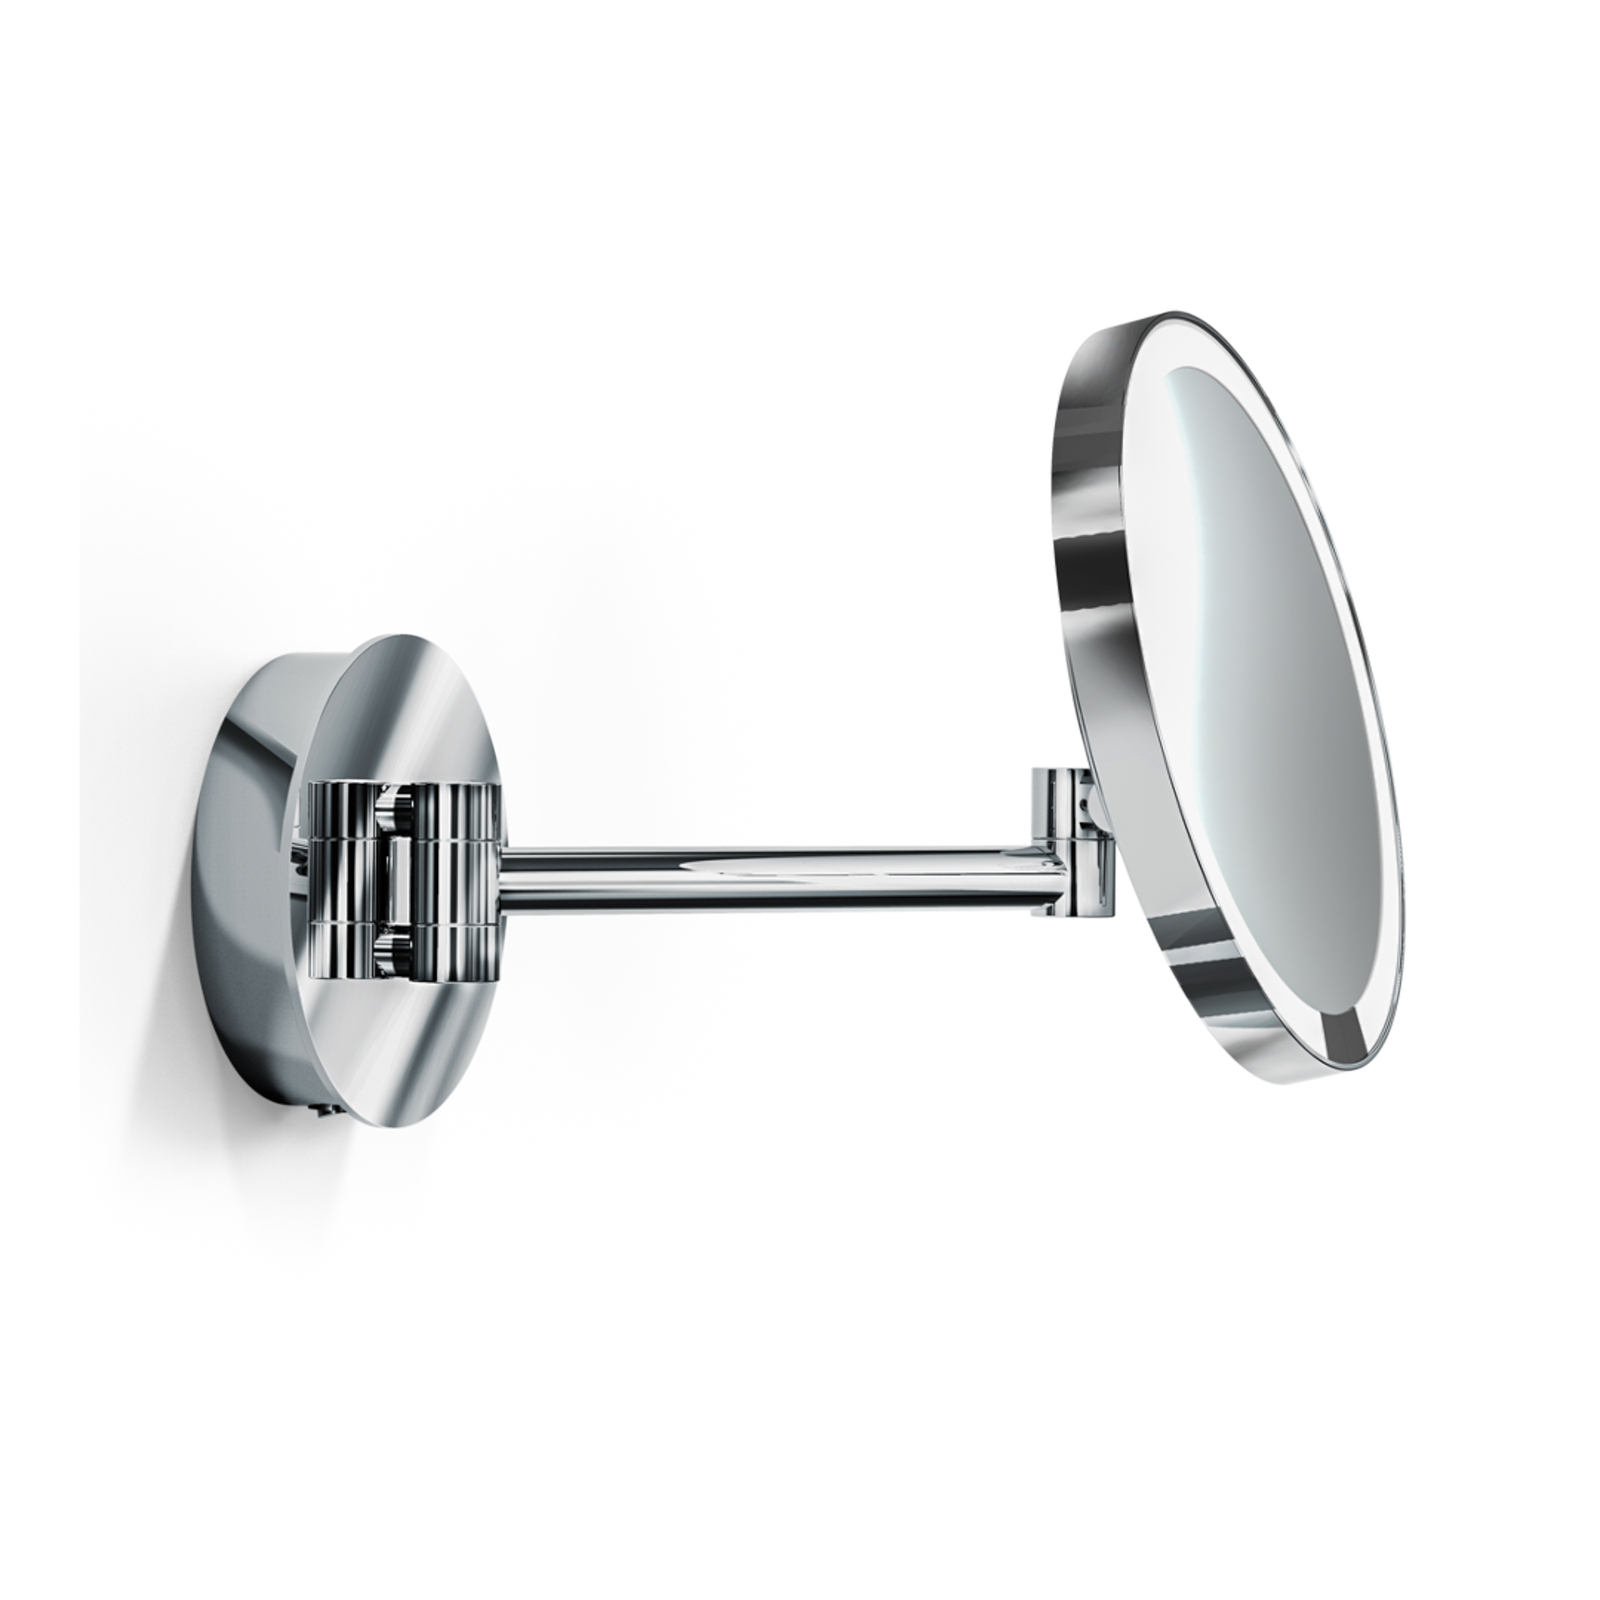 Decor Walther WR7X LED wall make-up mirror chrome